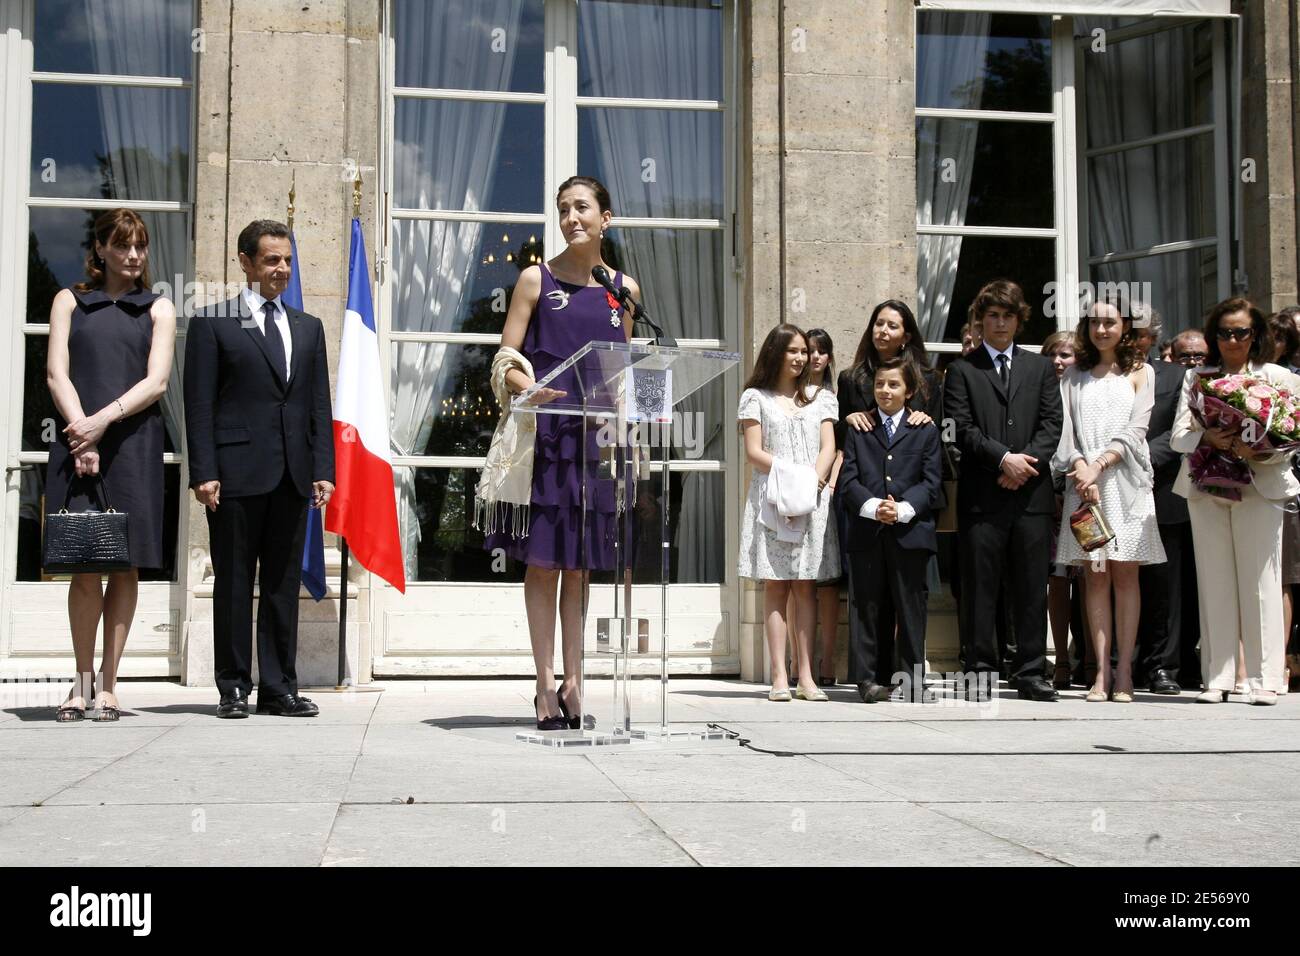 Former Franco-Colombian hostage Ingrid Betancourt reacts near French First Lady Carla Bruni-Sarkozy and President Nicolas Sarkozy and her family ( her niece Anastasia, her nephew Stanislas, her sister Astrid Betancourt, her son Lorenzo Delloye, her daughter Melanie Delloye and her mother Yolanda Pulecio after being awarded with the Legion of Honor by French President Nicolas Sarkozy during the July 14th traditional Garden Party at the Elysee Palace in Paris, France on July 14, 2008. Photo by Benainous-Hounsfield/Pool/ABACAPRESS.COM Stock Photo